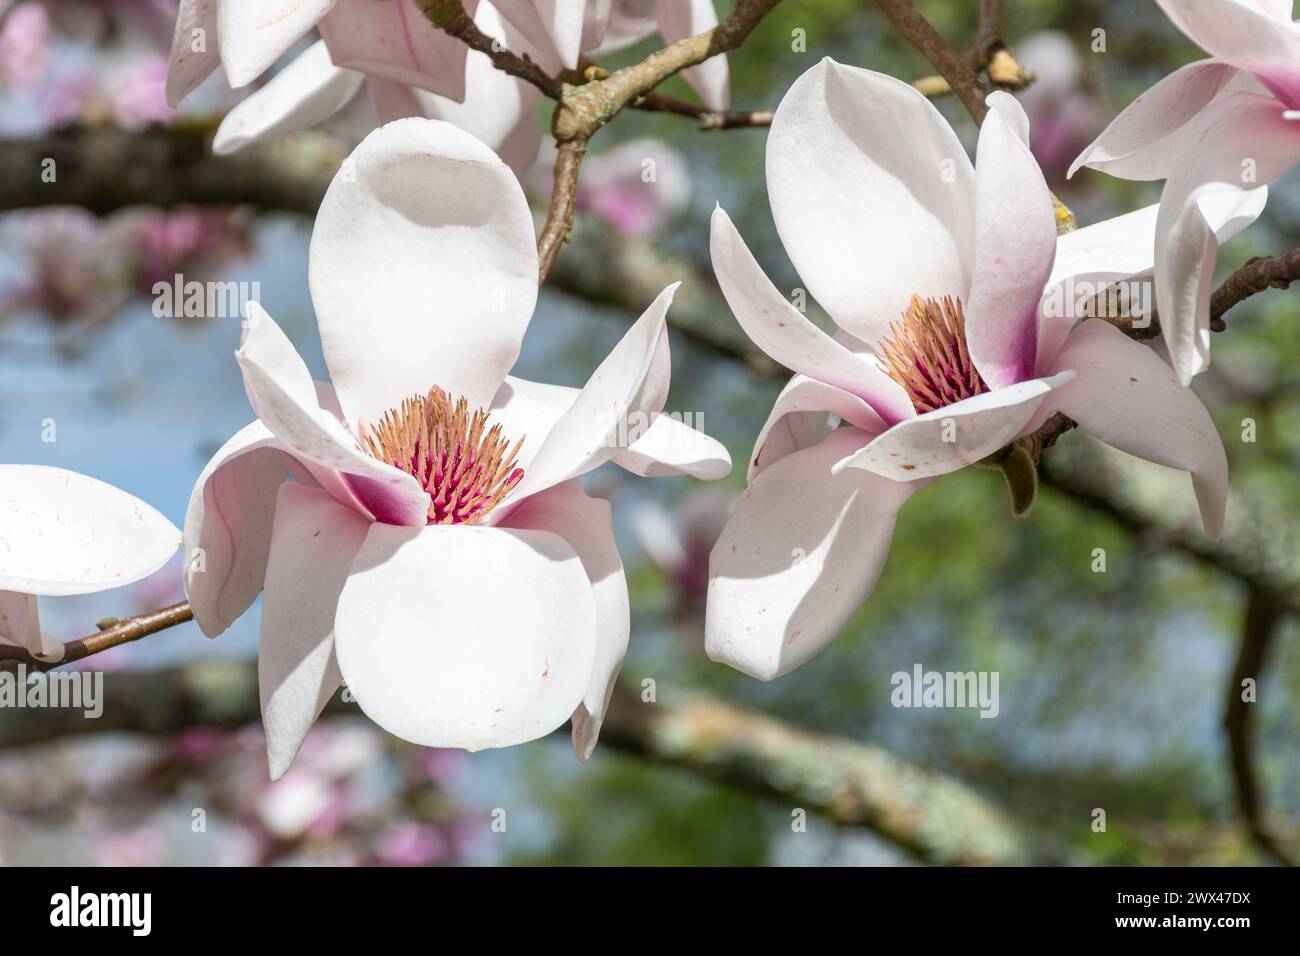 Magnolia 'Athene', close-up of the large cup-shaped white and pink flowers on the spring flowering tree, UK Stock Photo